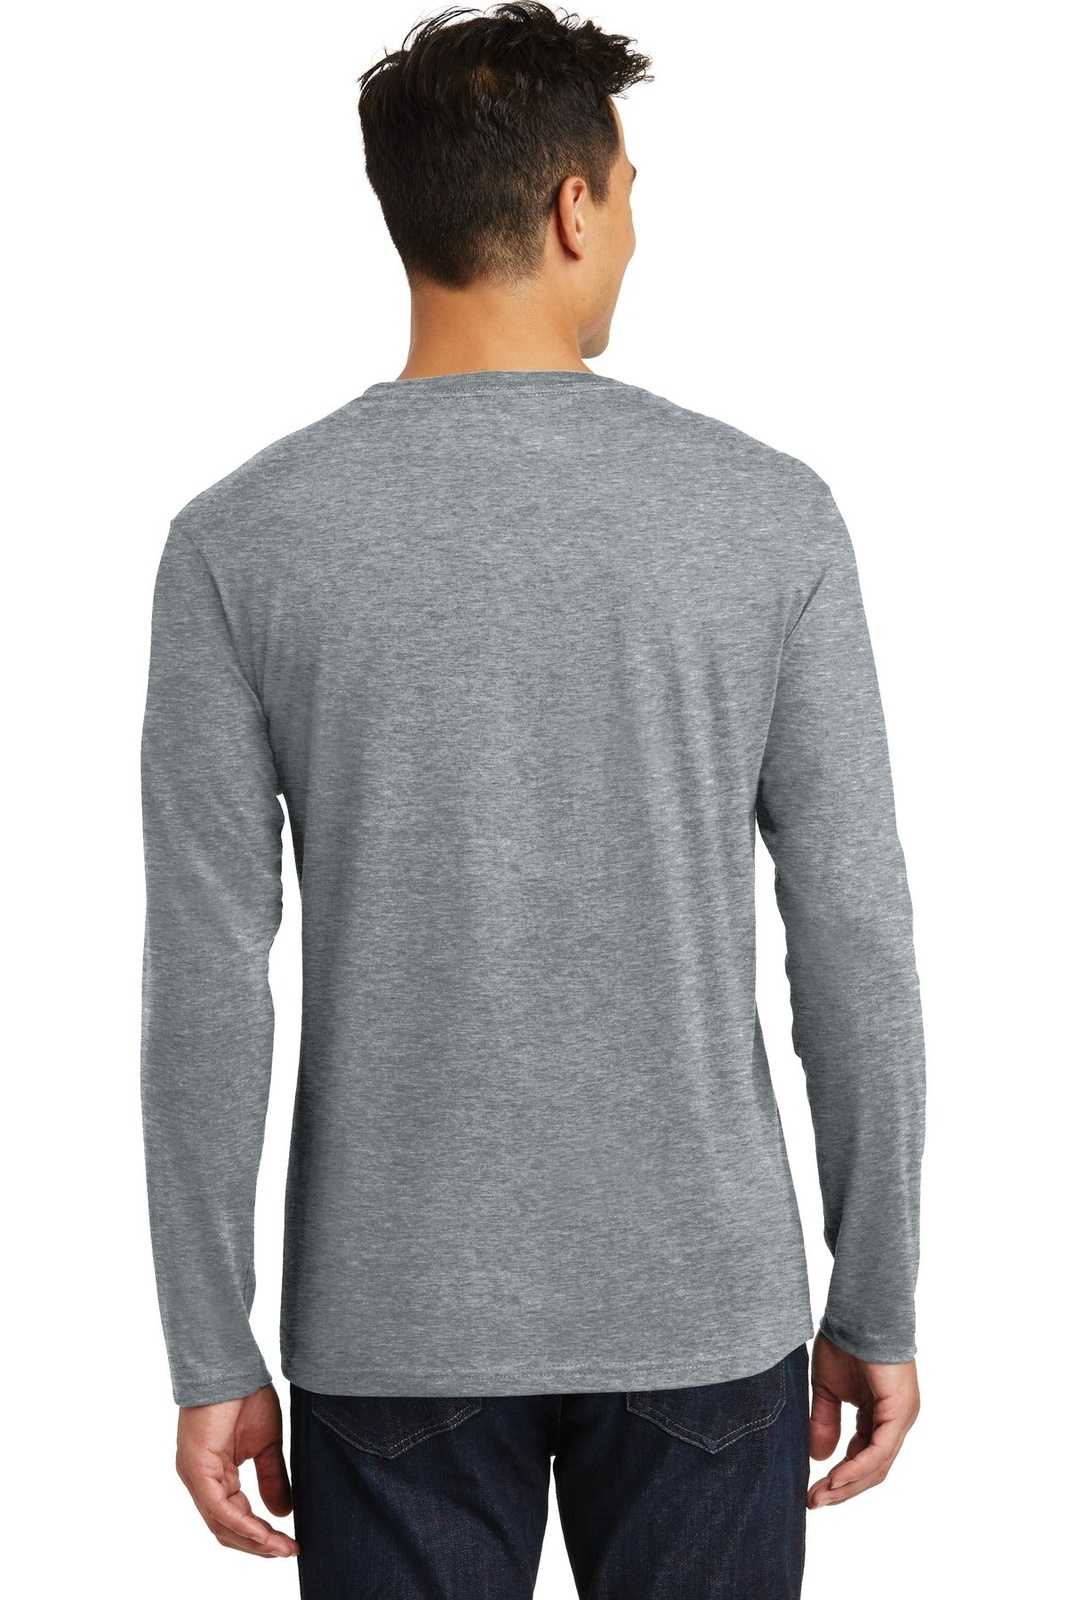 District DT105 Perfect Weight Long Sleeve Tee - Heathered Steel - HIT a Double - 2